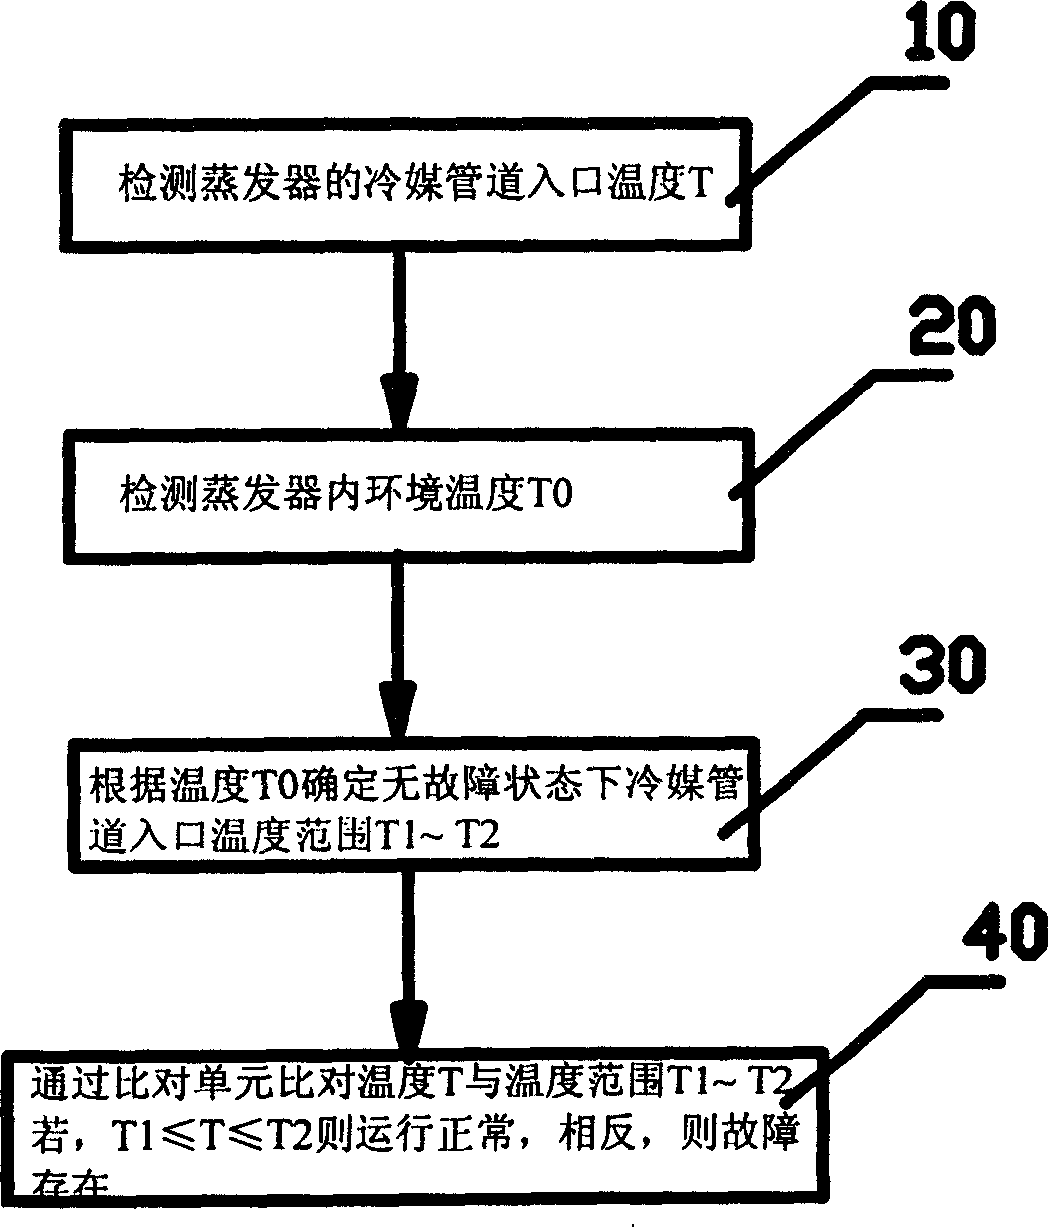 Air conditioner capable of diagnosing failure of refrigerant shortage and system block and diagnosis method thereof